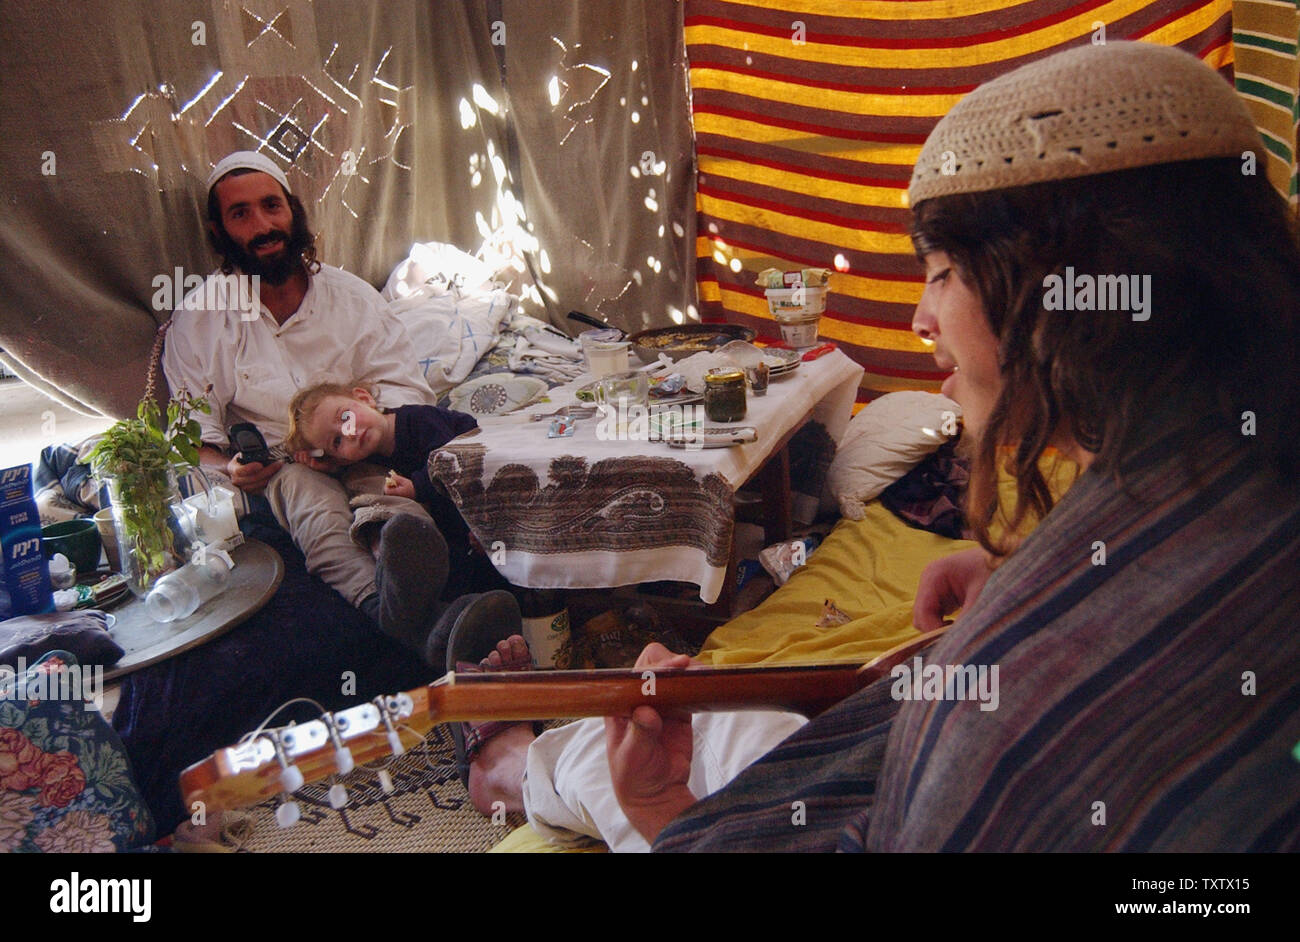 An Israeli settler plays a guitar in a sukka for the religious holiday, Sukkot,  in the Biblical city of Hebron, October 14, 2003, traditionally believed to be the burial site of Abraham, Isaac, Jacob and their wives.  (UPI Photo/Debbie Hill) Stock Photo